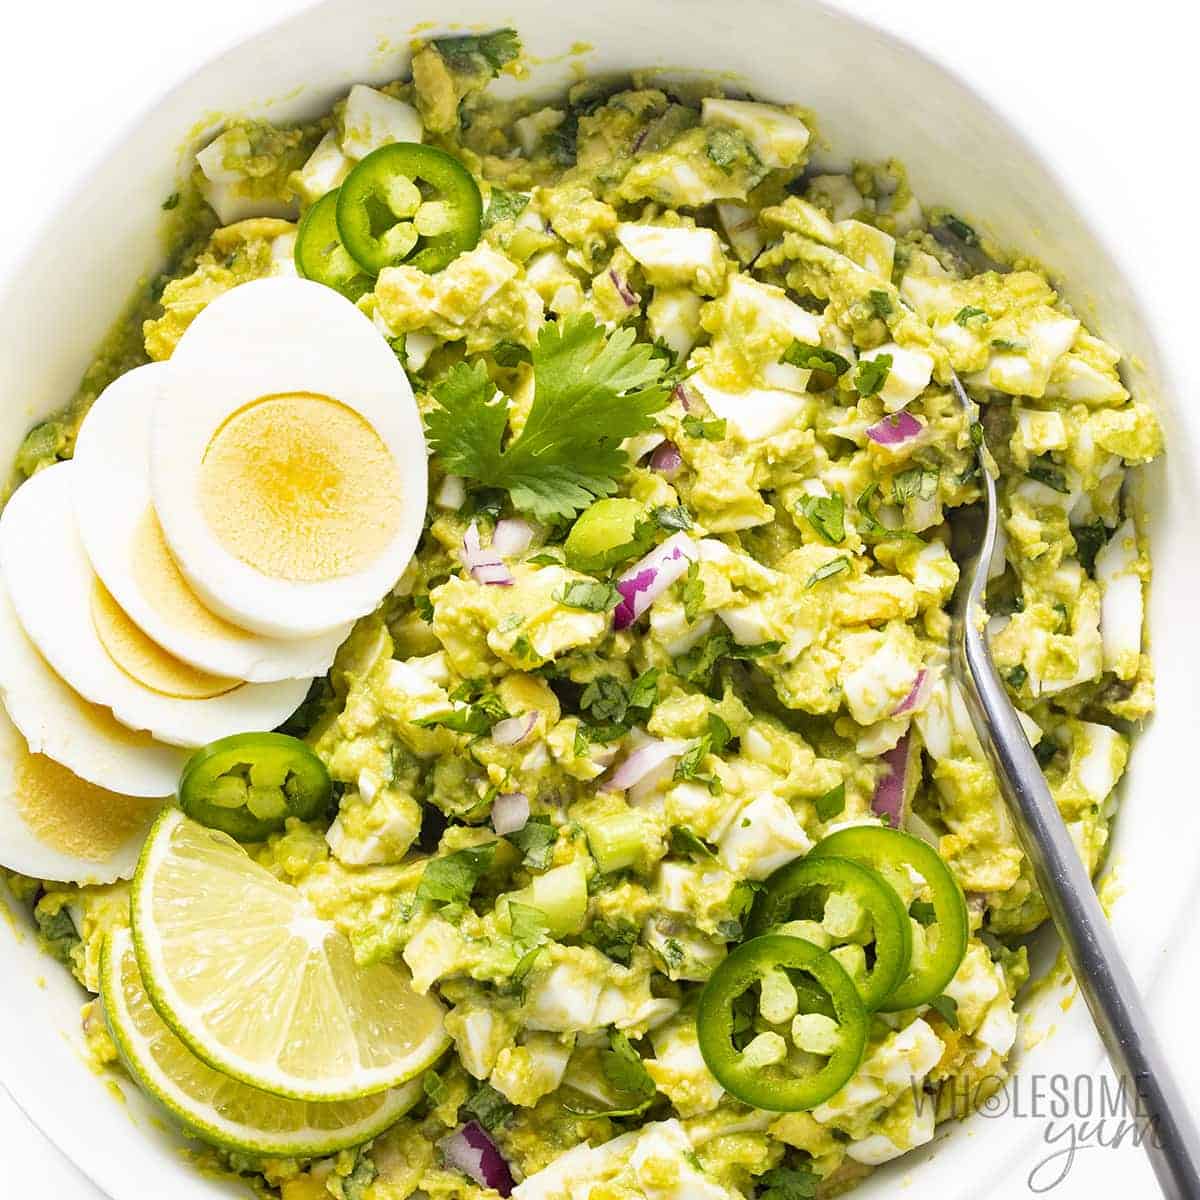 Avocado egg salad without mayo in a bowl with garnishes.